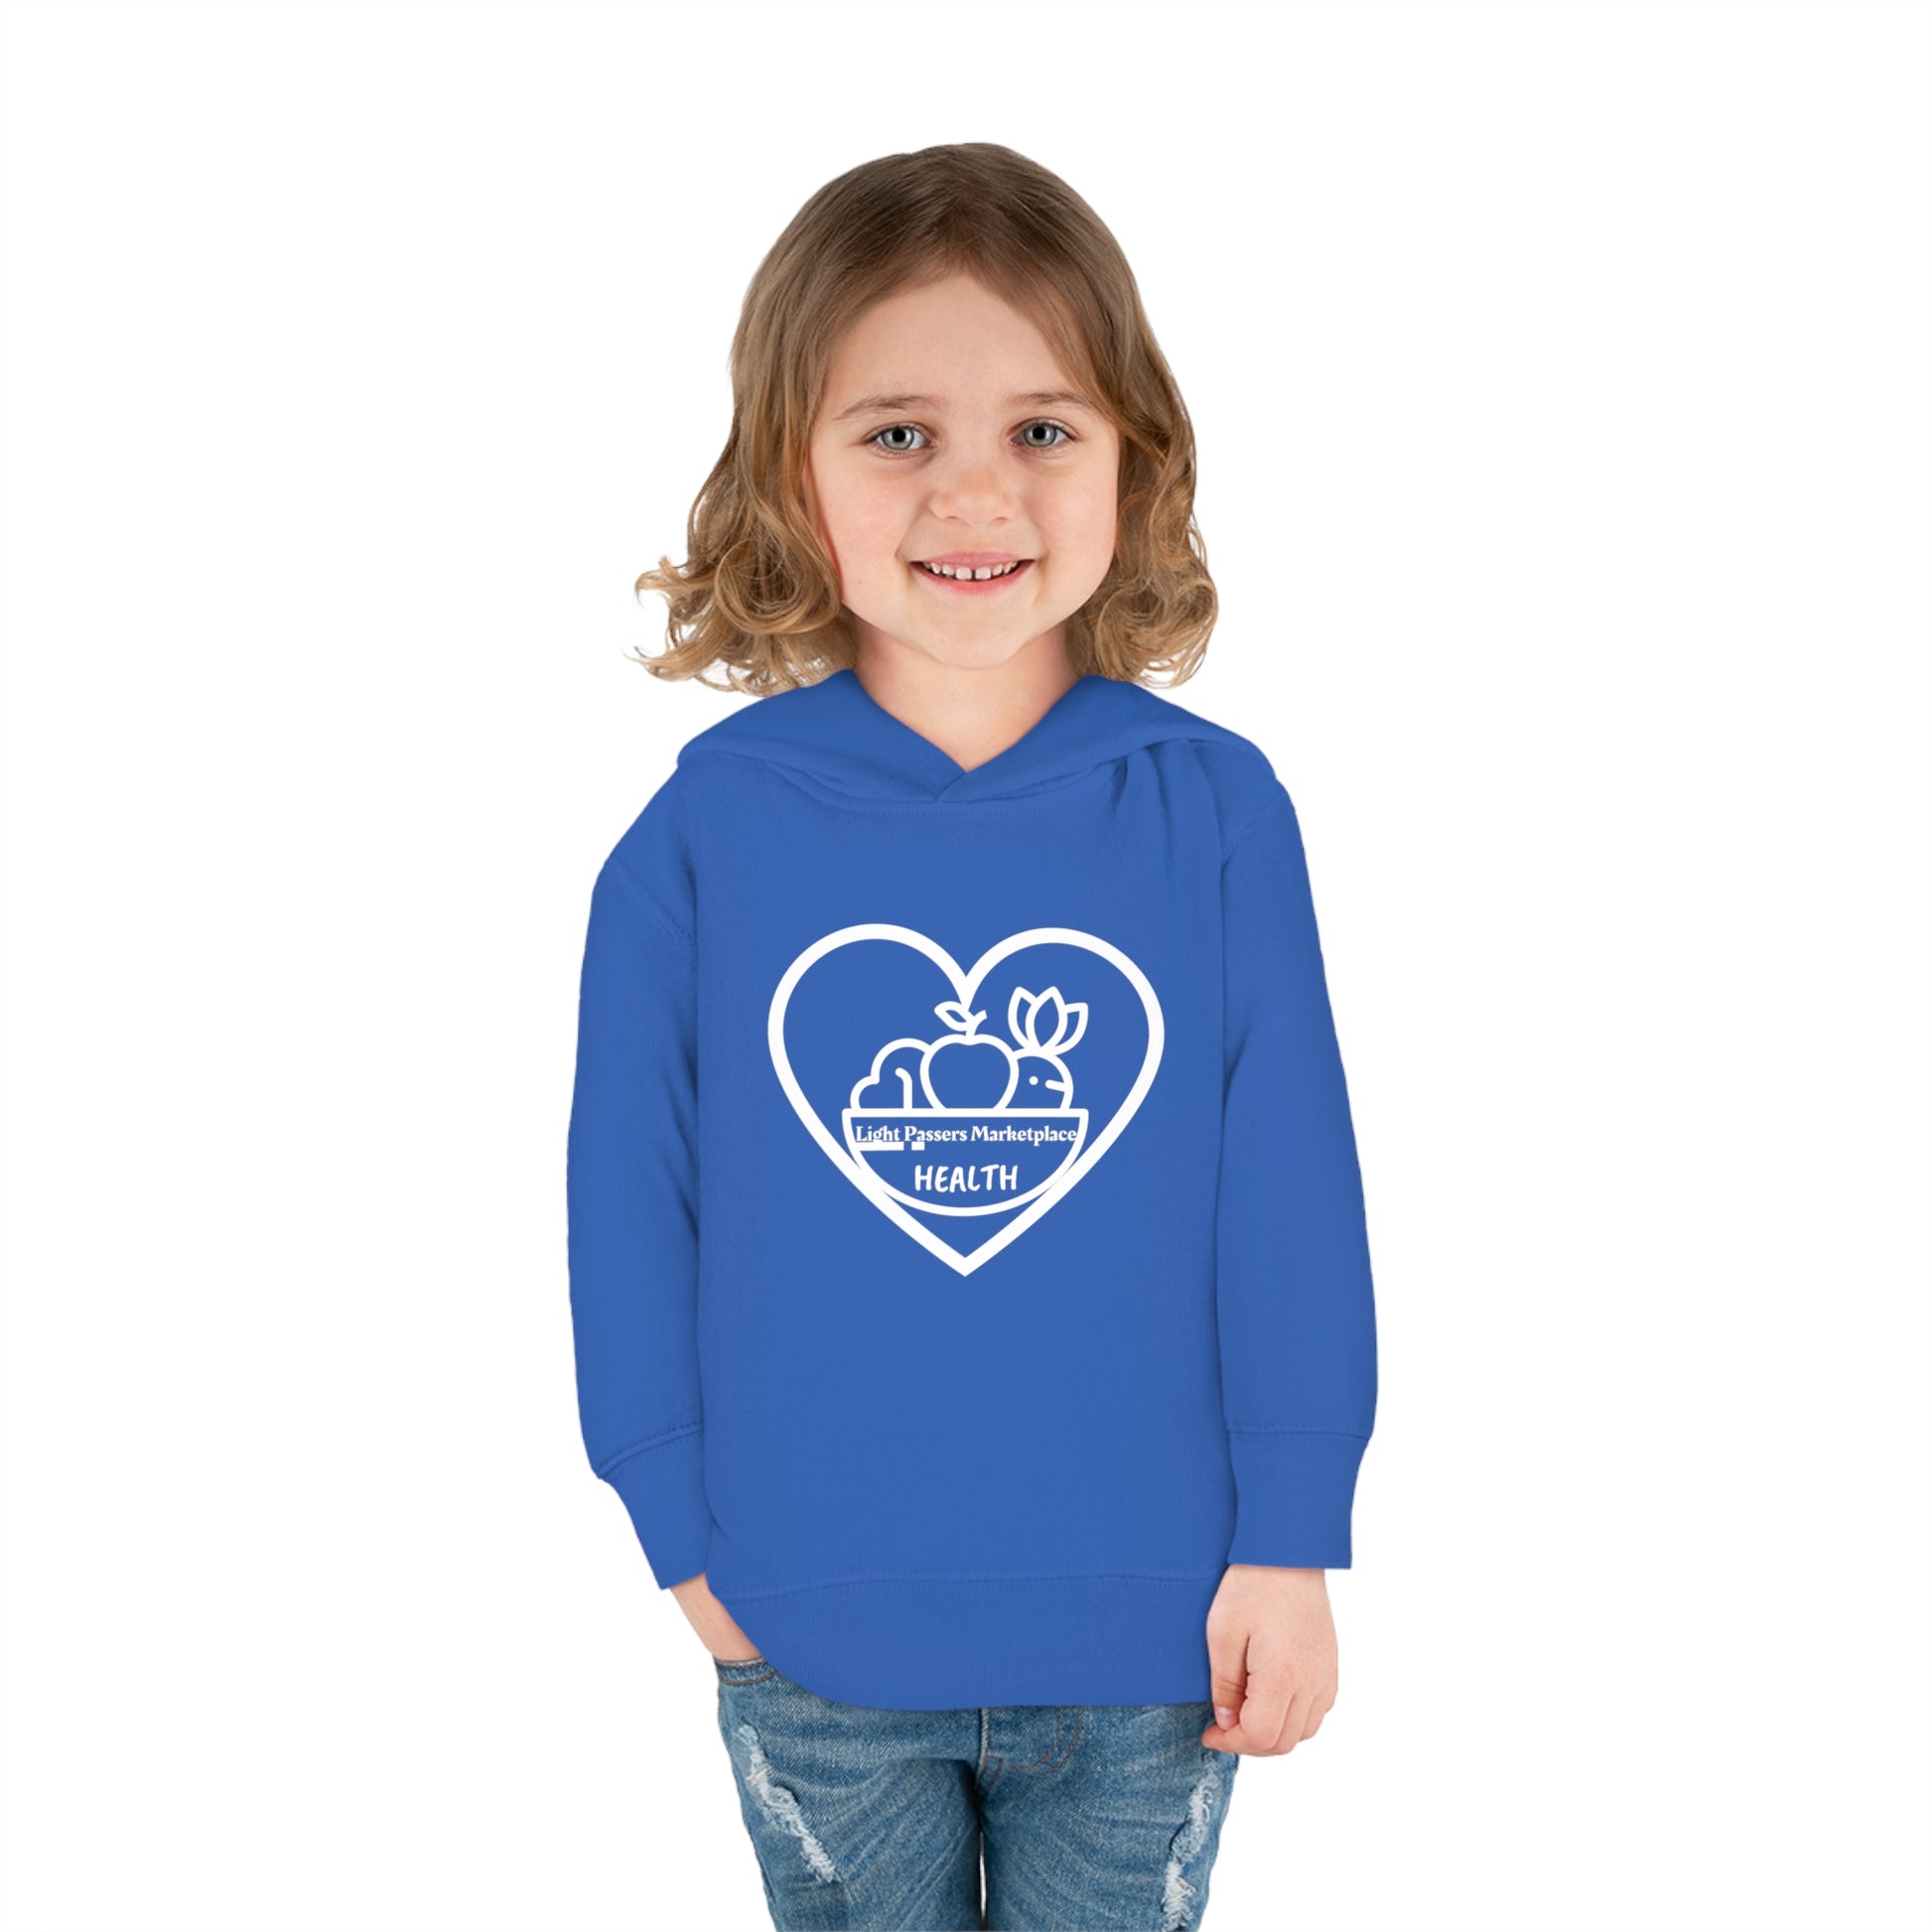 A child in a blue Fruit Basket Toddler Hoodie, smiling at the camera. Features jersey-lined hood, cover-stitched details, and side seam pockets for cozy comfort.